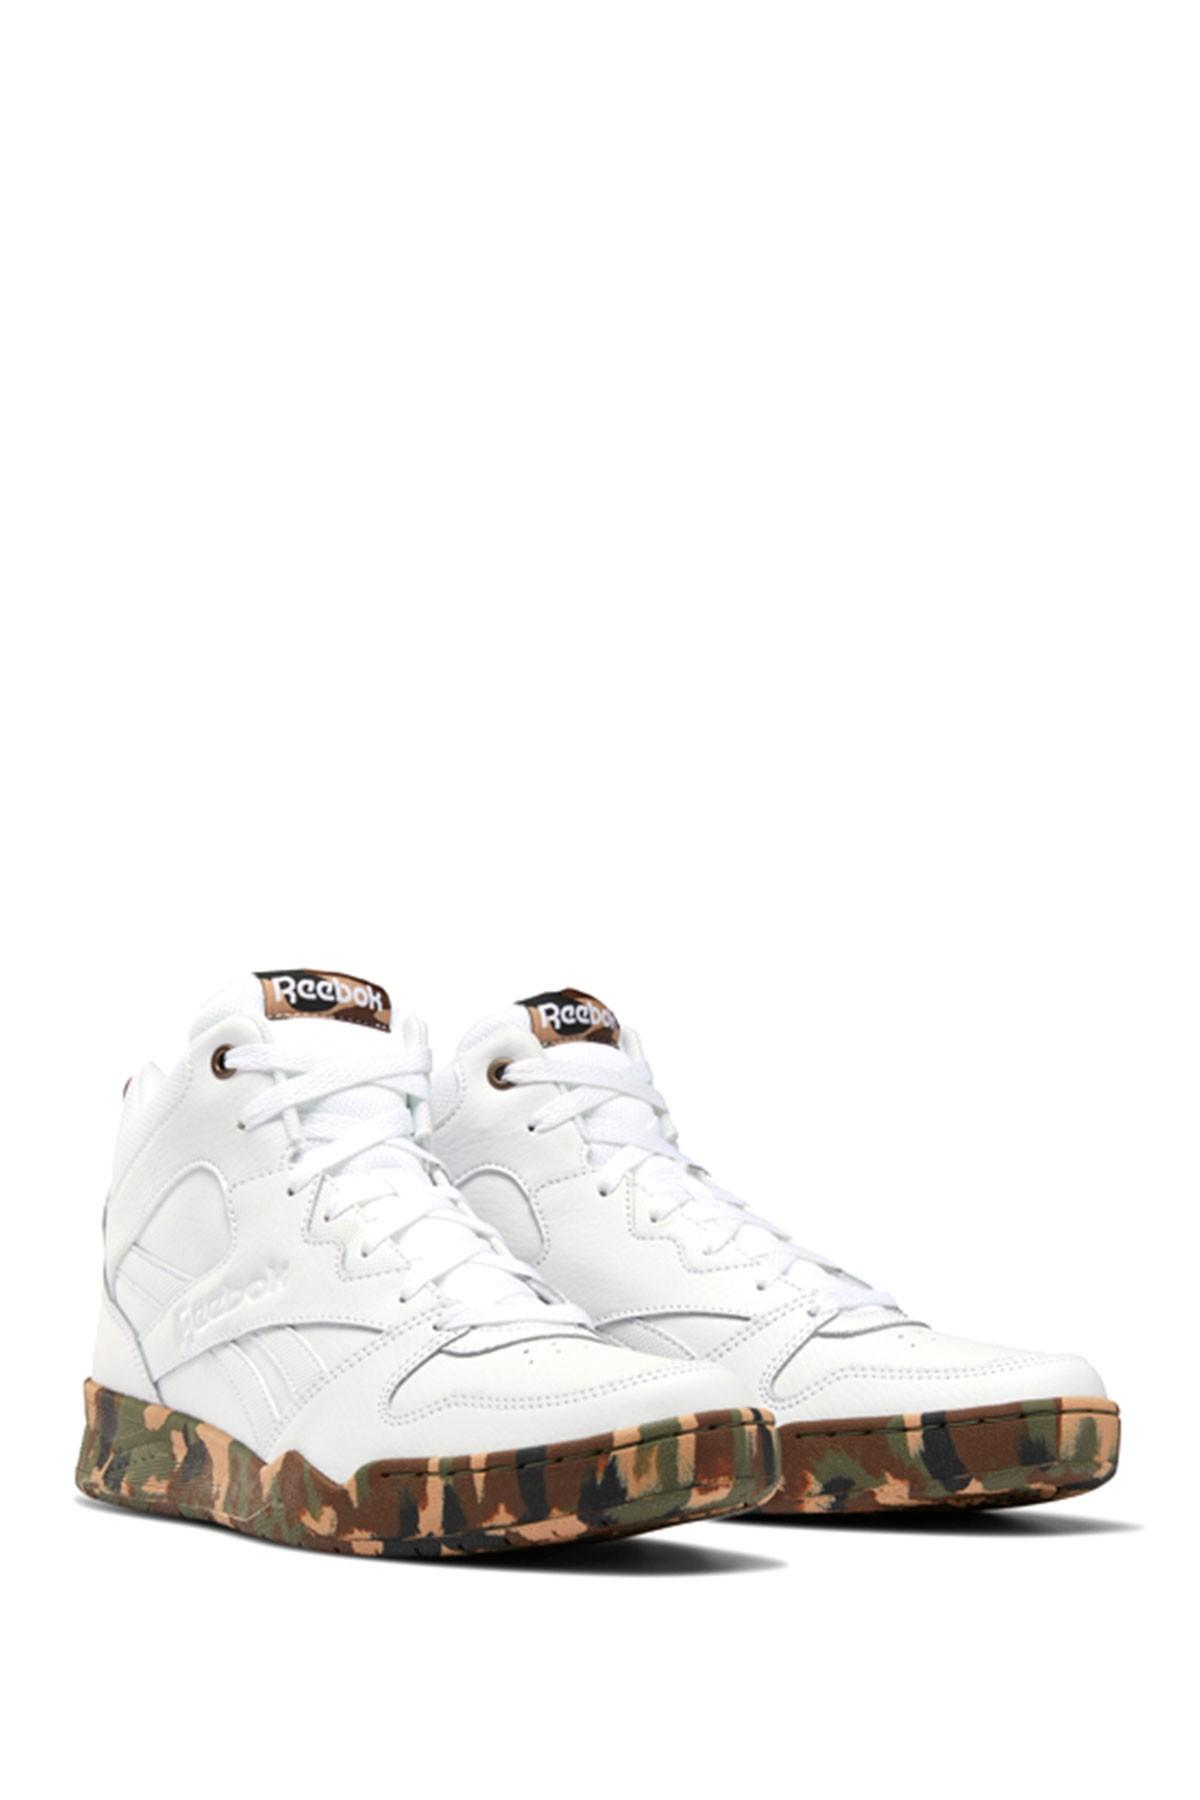 Reebok Royal Camouflage Sole Sneaker in White/White/Camo (White) for Men |  Lyst